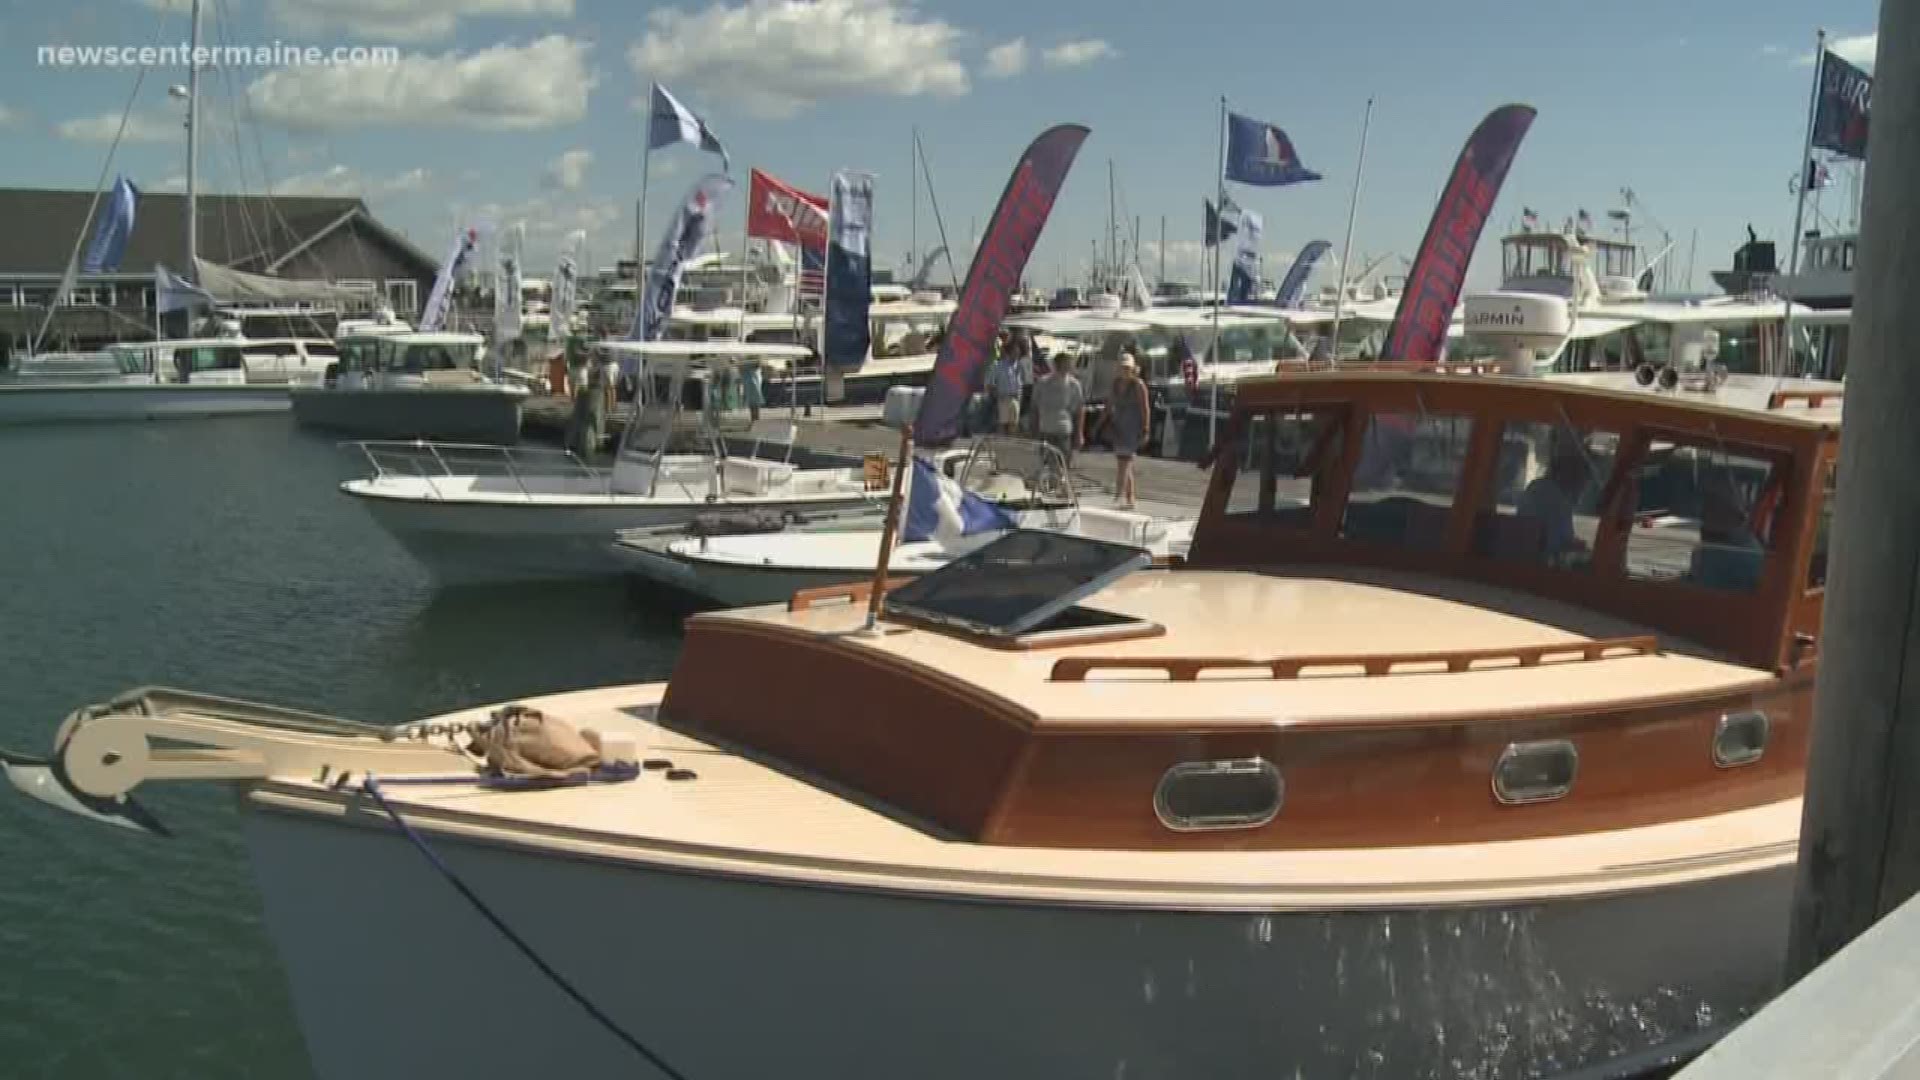 Boating business booming in Maine